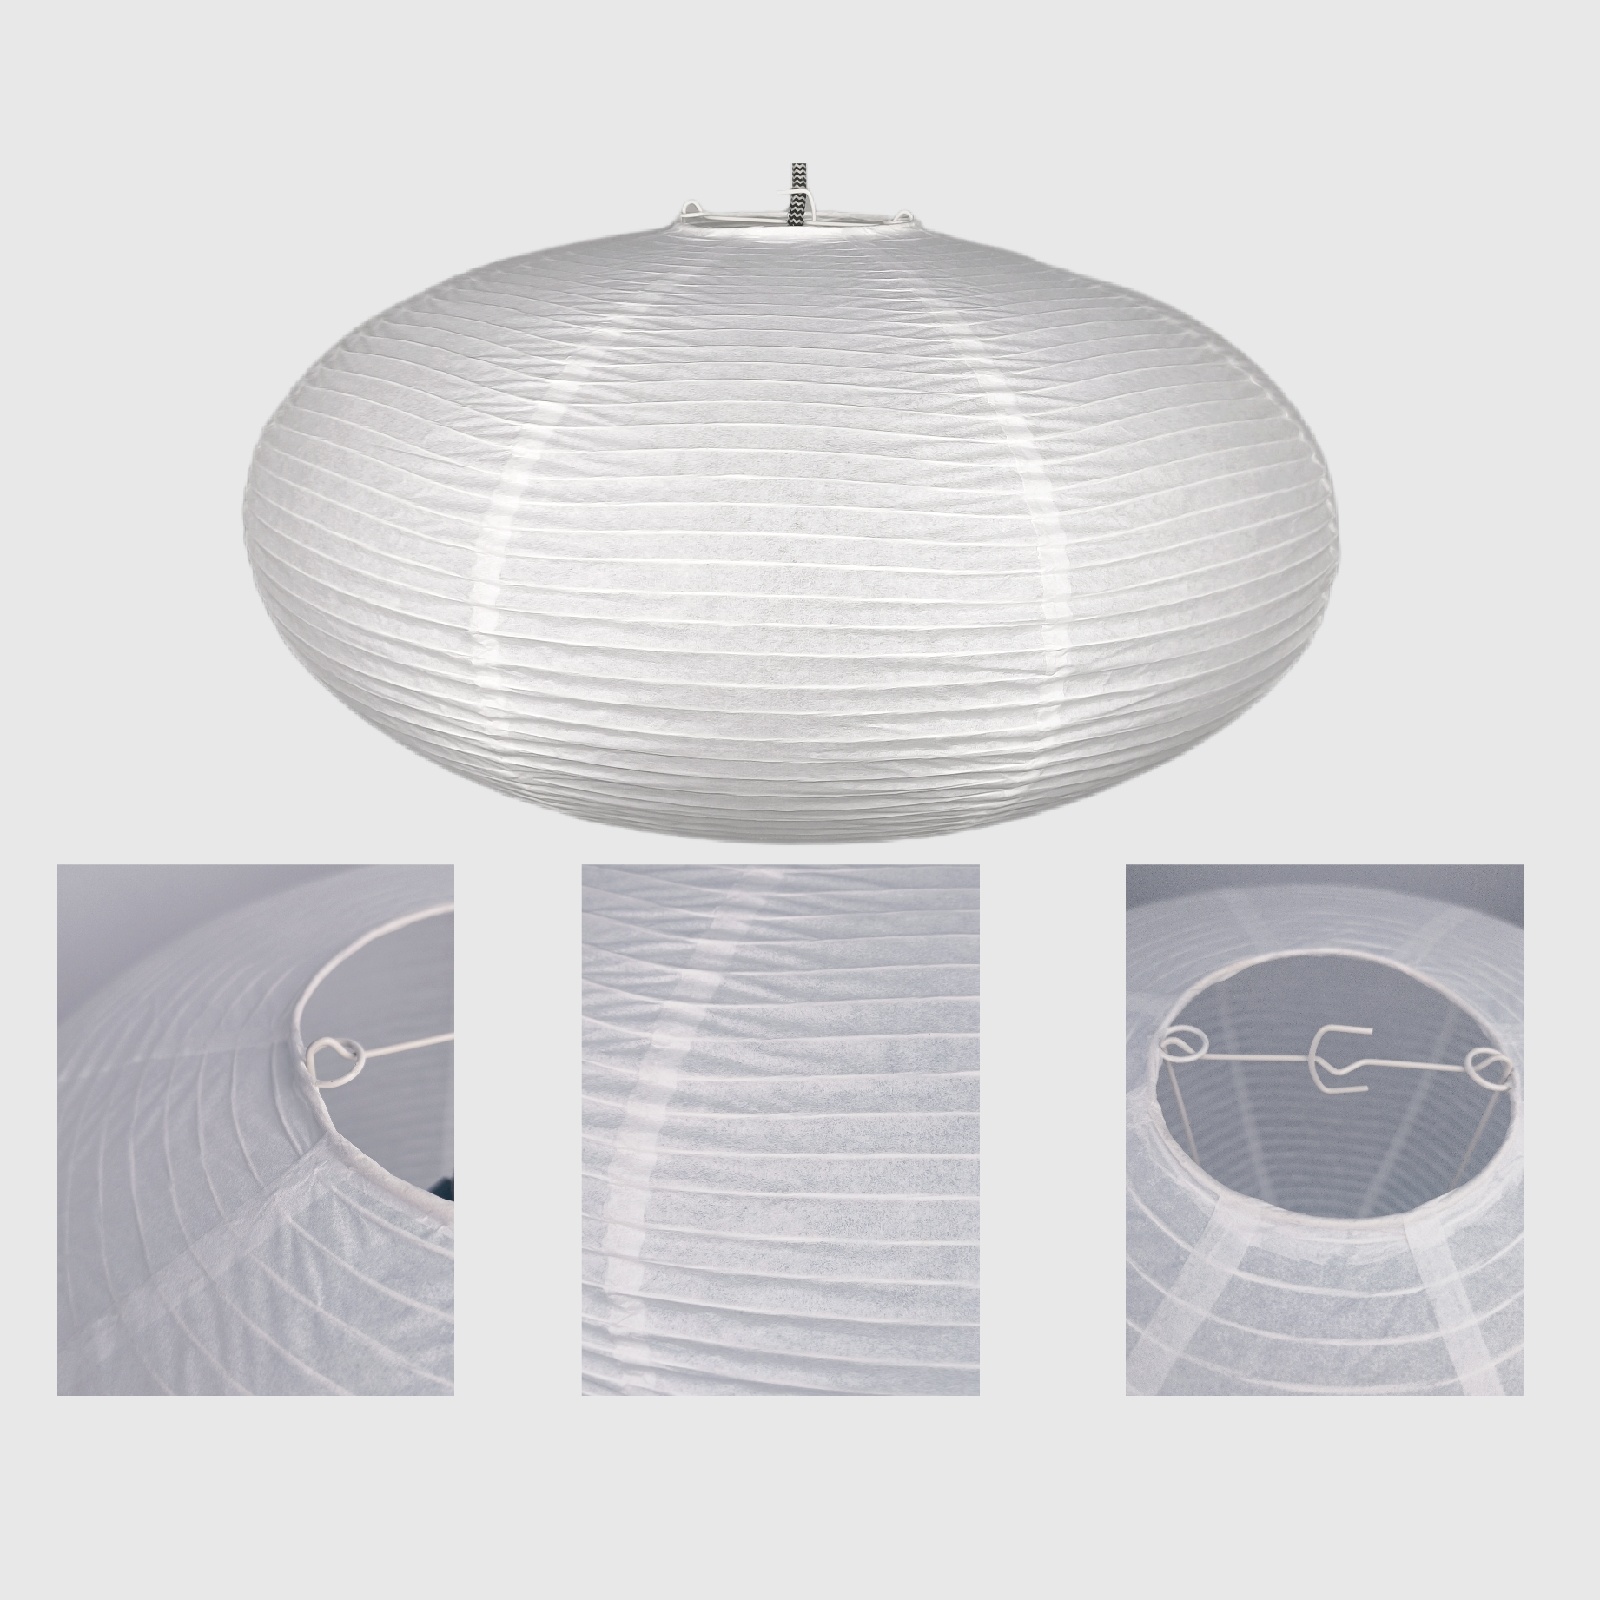 HJLMC Oval Chandelier, White Decorative Paper Lampshade, Japanese/Chinese Lantern